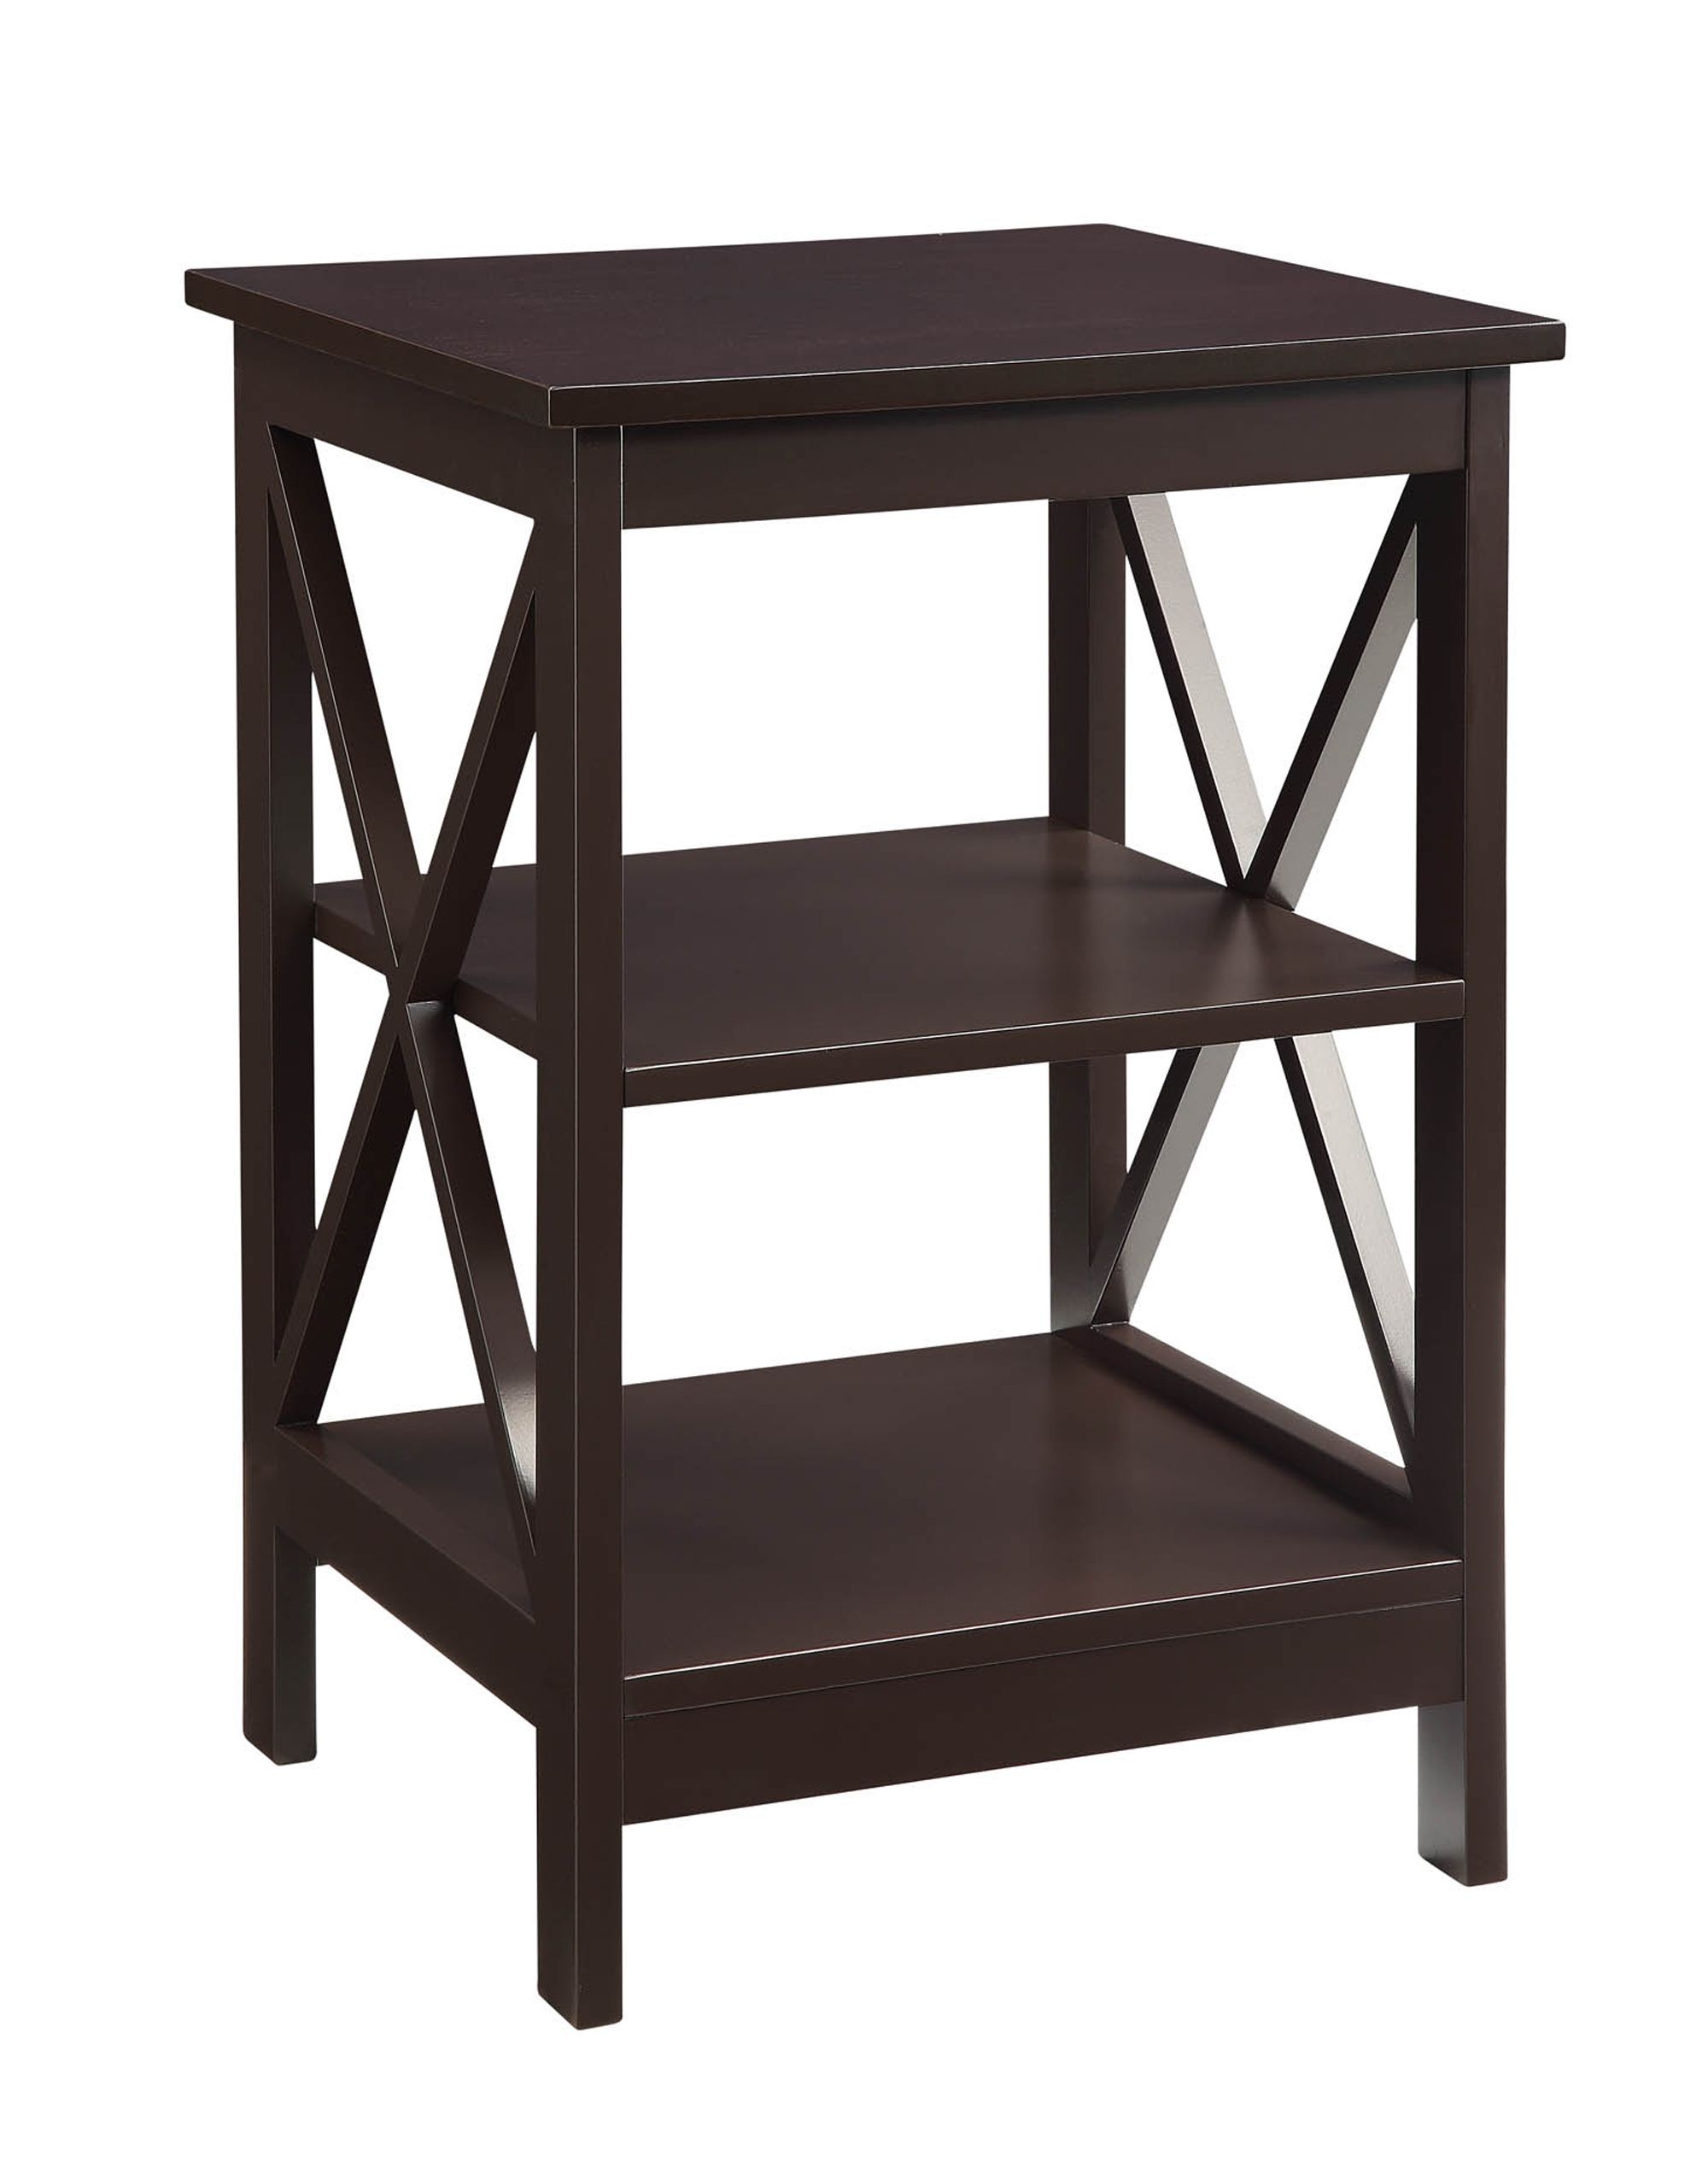 the threshold owings collection side table espresso perfect accent target addition any homes decor high and includes drawer drum kit throne peekaboo metal glass bedside living